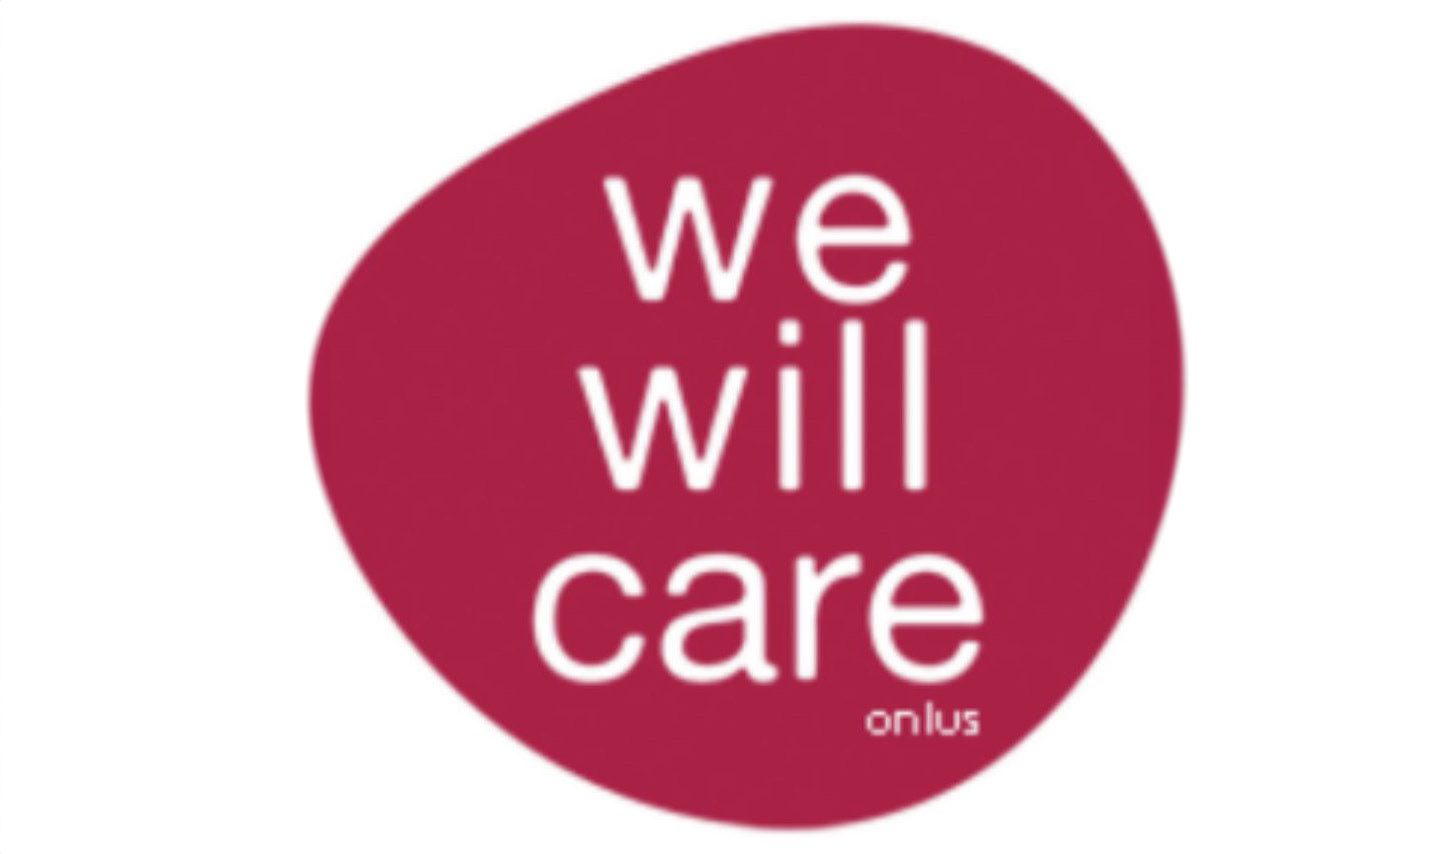 logo we will care onlus